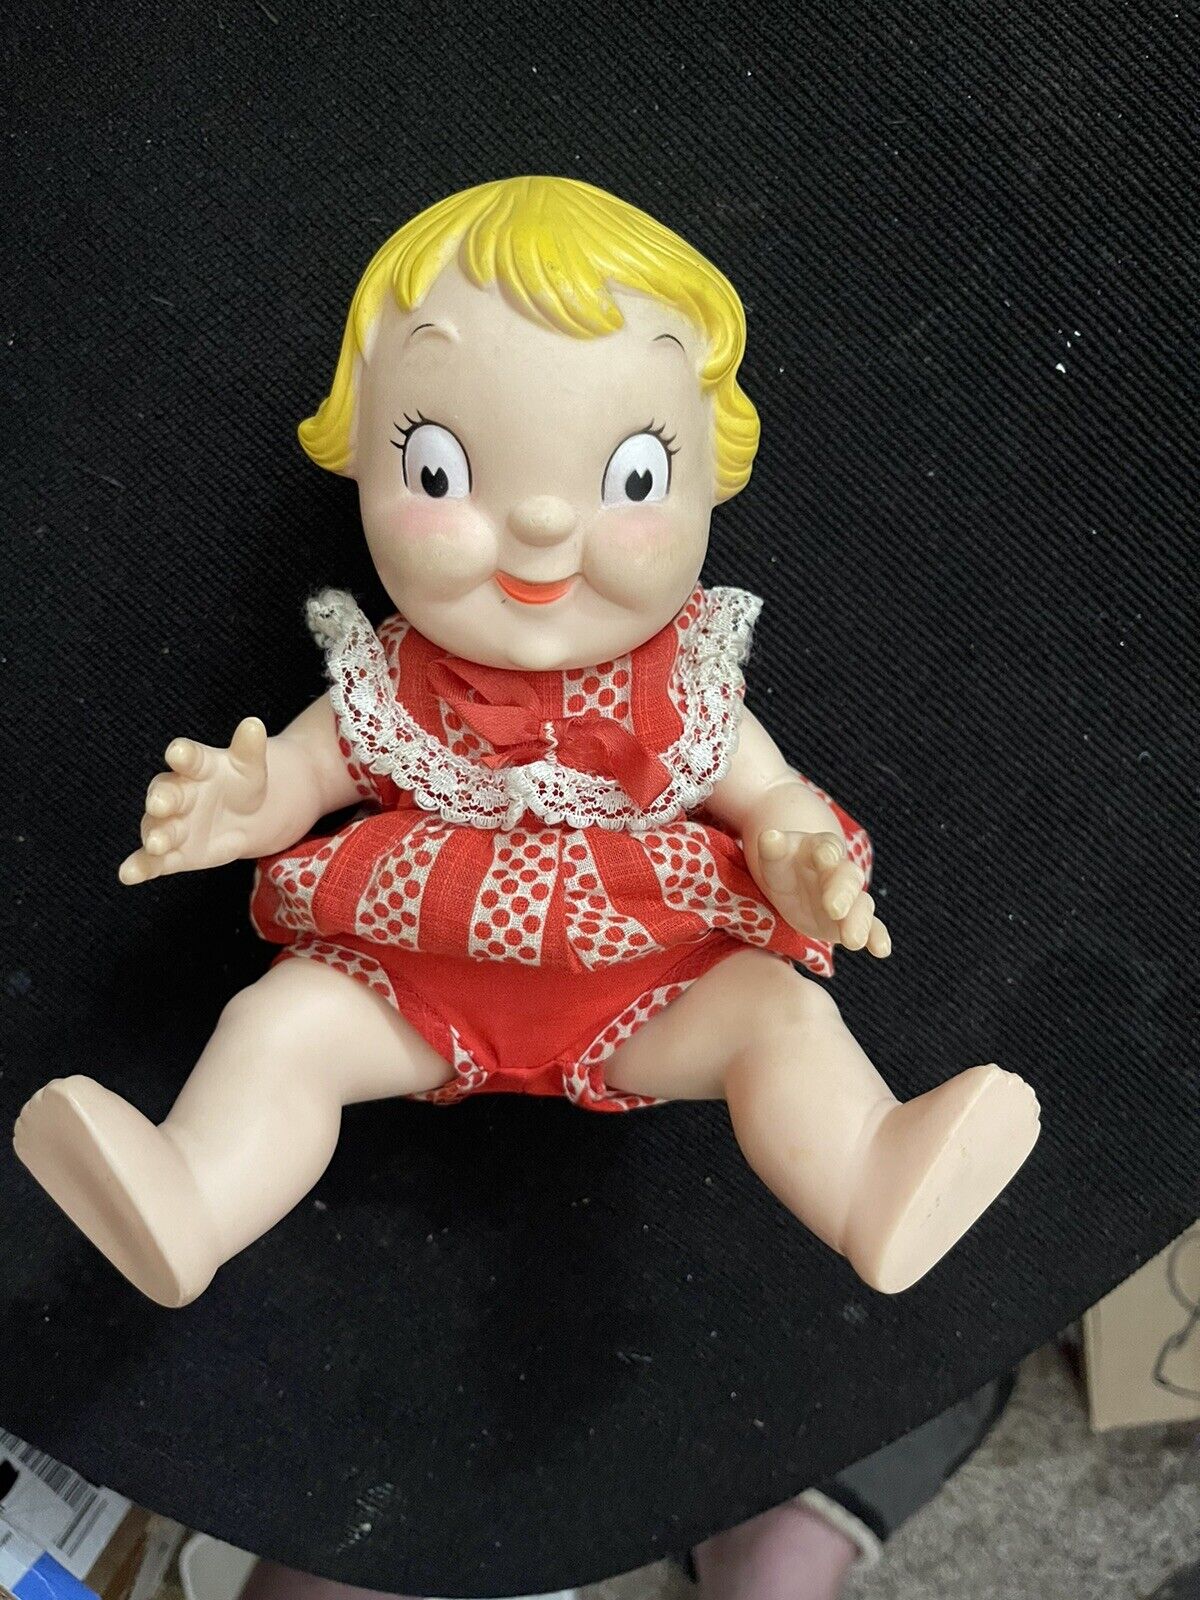 1960s-1970s CAMPBELLS SOUP DOLL